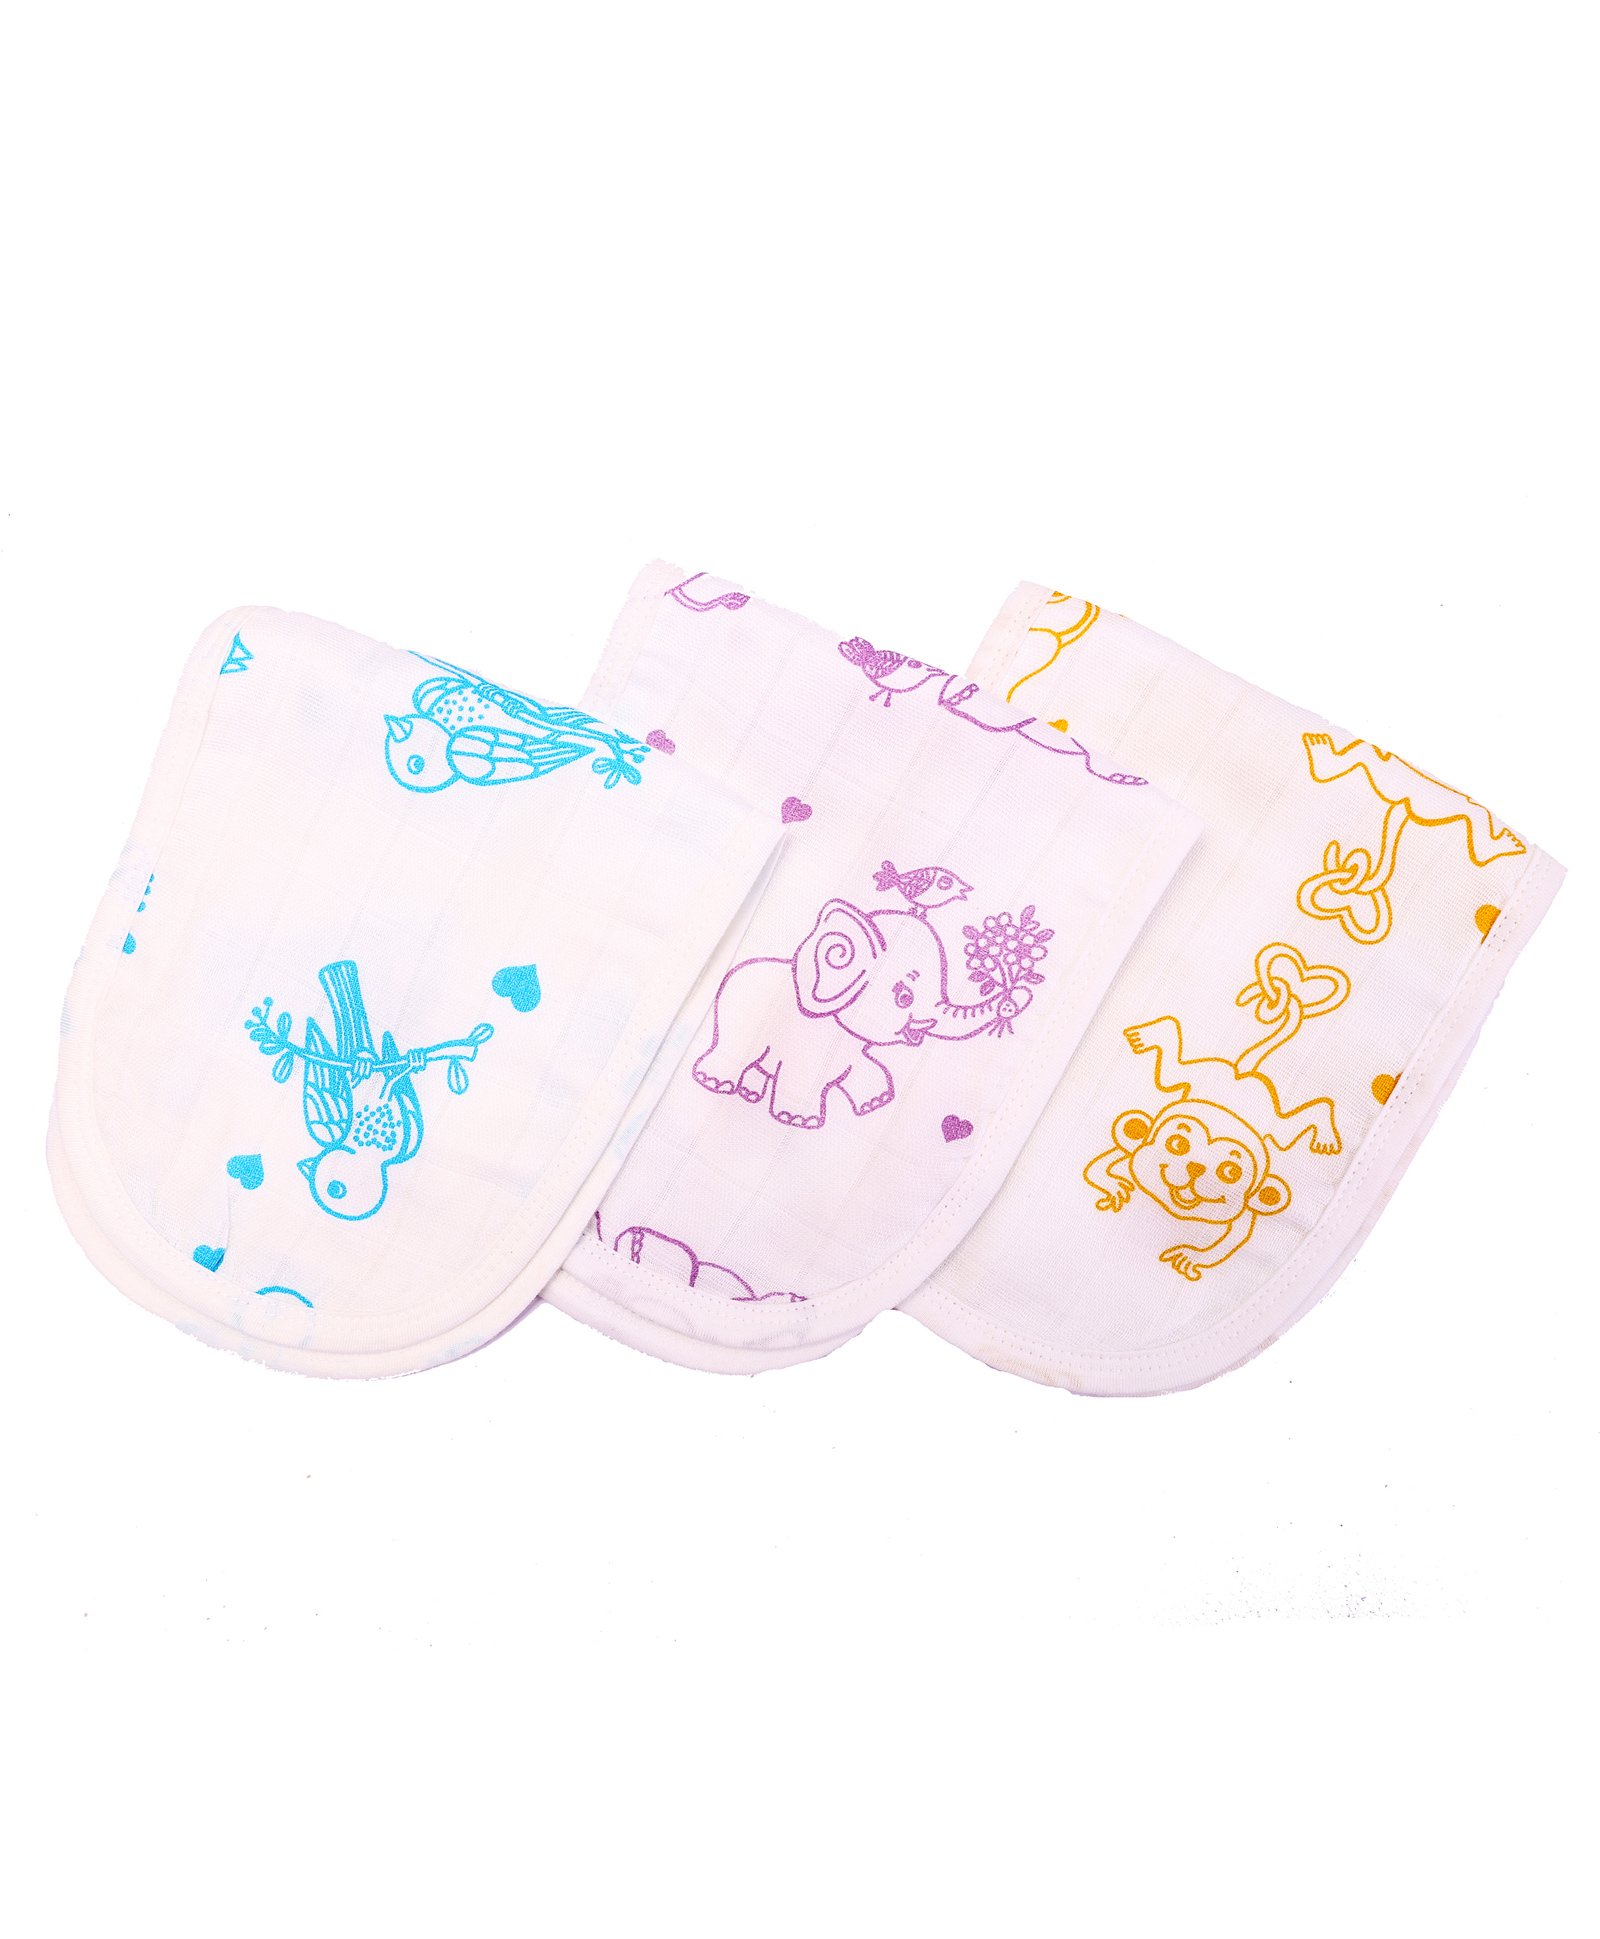 7 Burp Cloths Size: Large 12 Months 20” by 10” 1 Free Best Burp Cloth for Newborns 0 Perfect Gift for Those Expecting! Muslin Burp Cloth “Starter Pack 